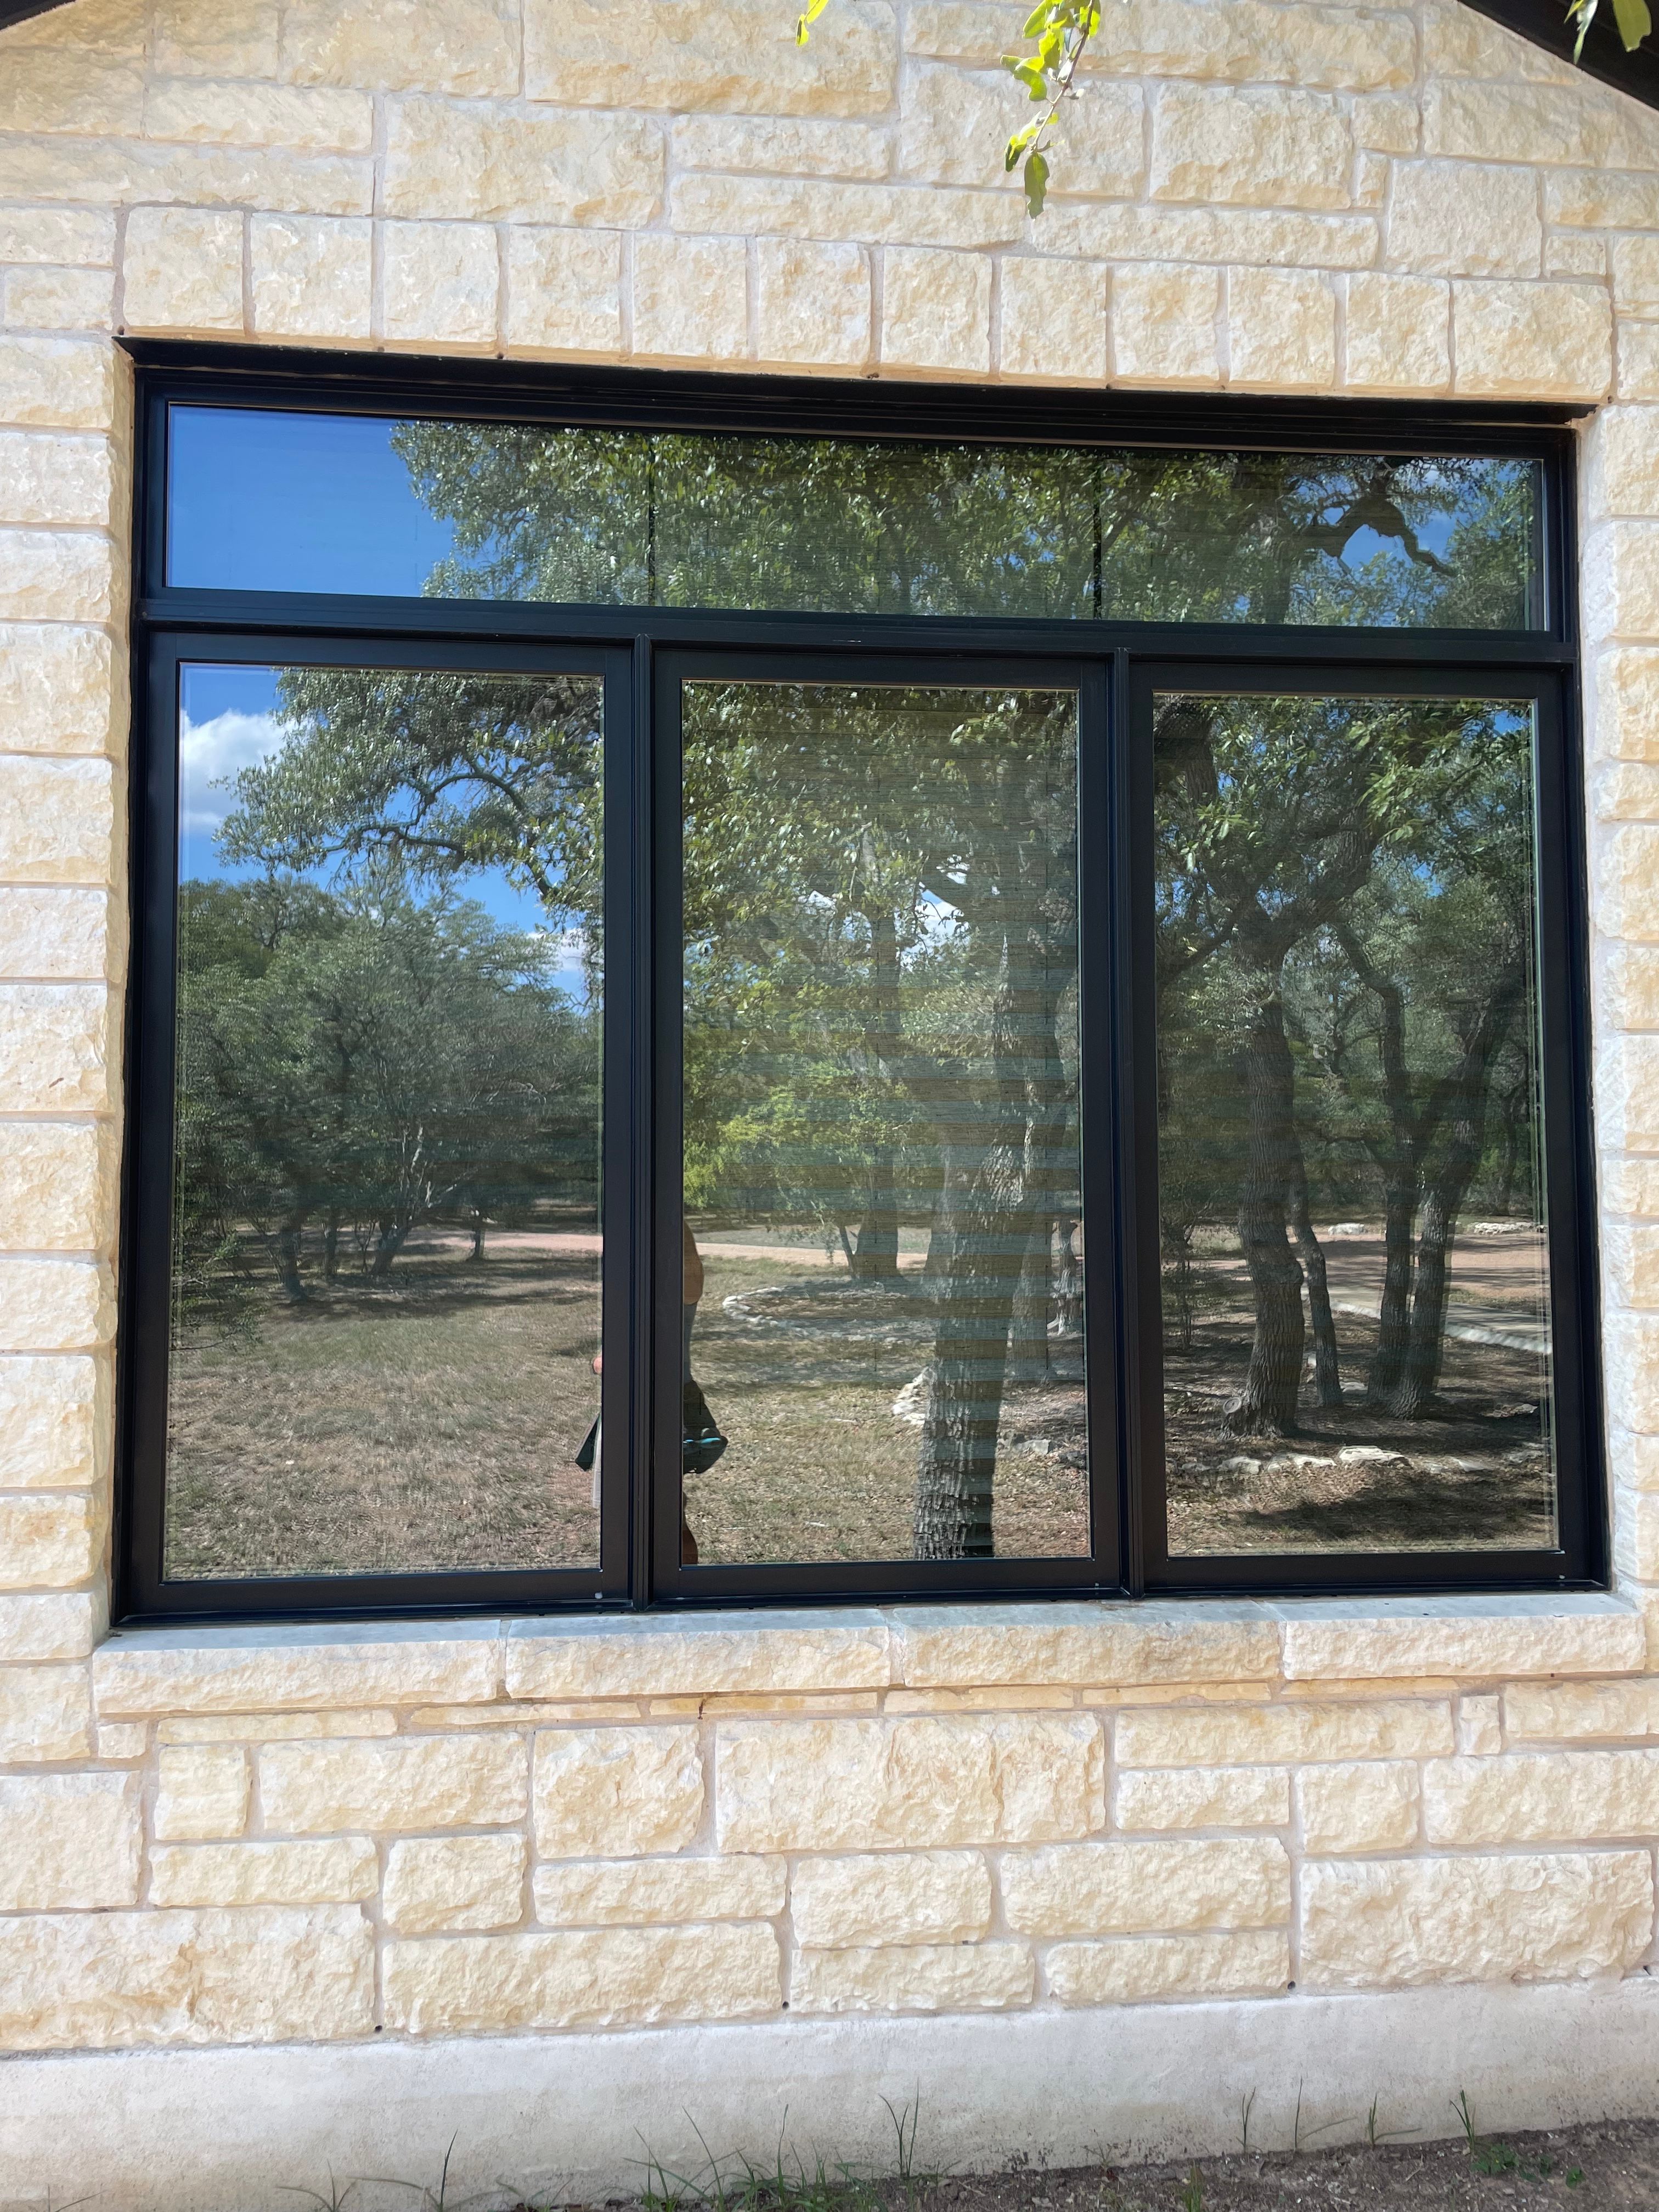 Solar Panel Cleaning for Patriot Window Cleaning LLC in Canyon Lake, TX